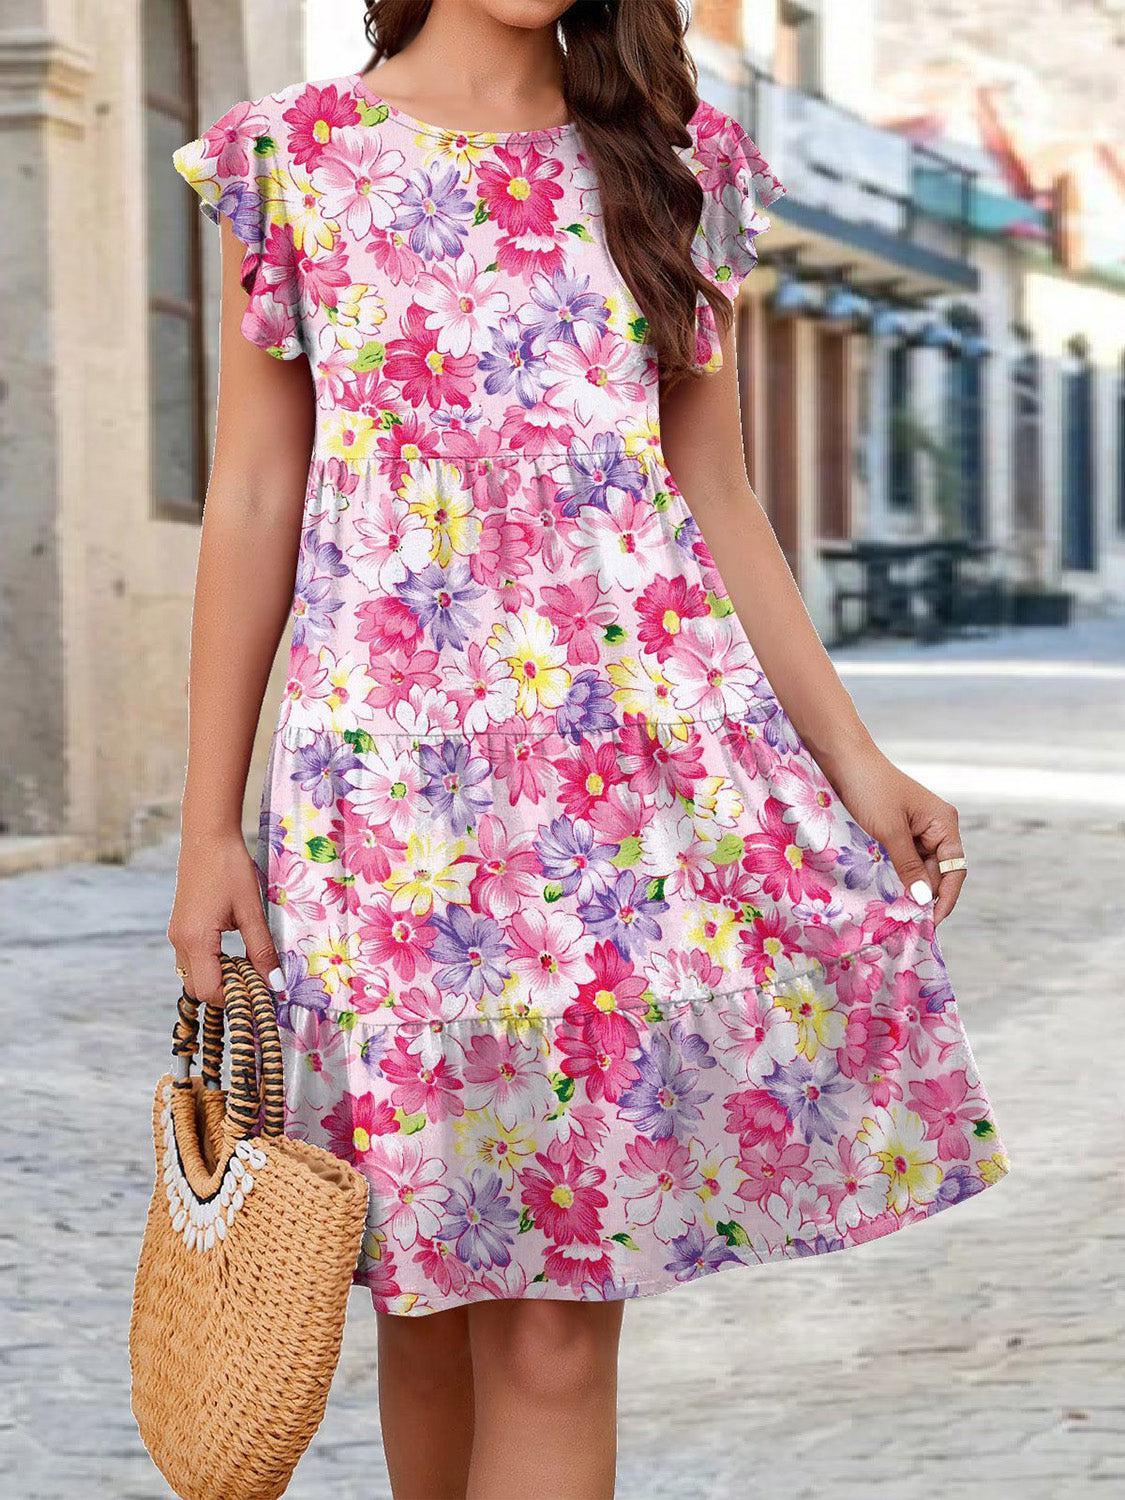 a woman in a floral dress holding a straw bag